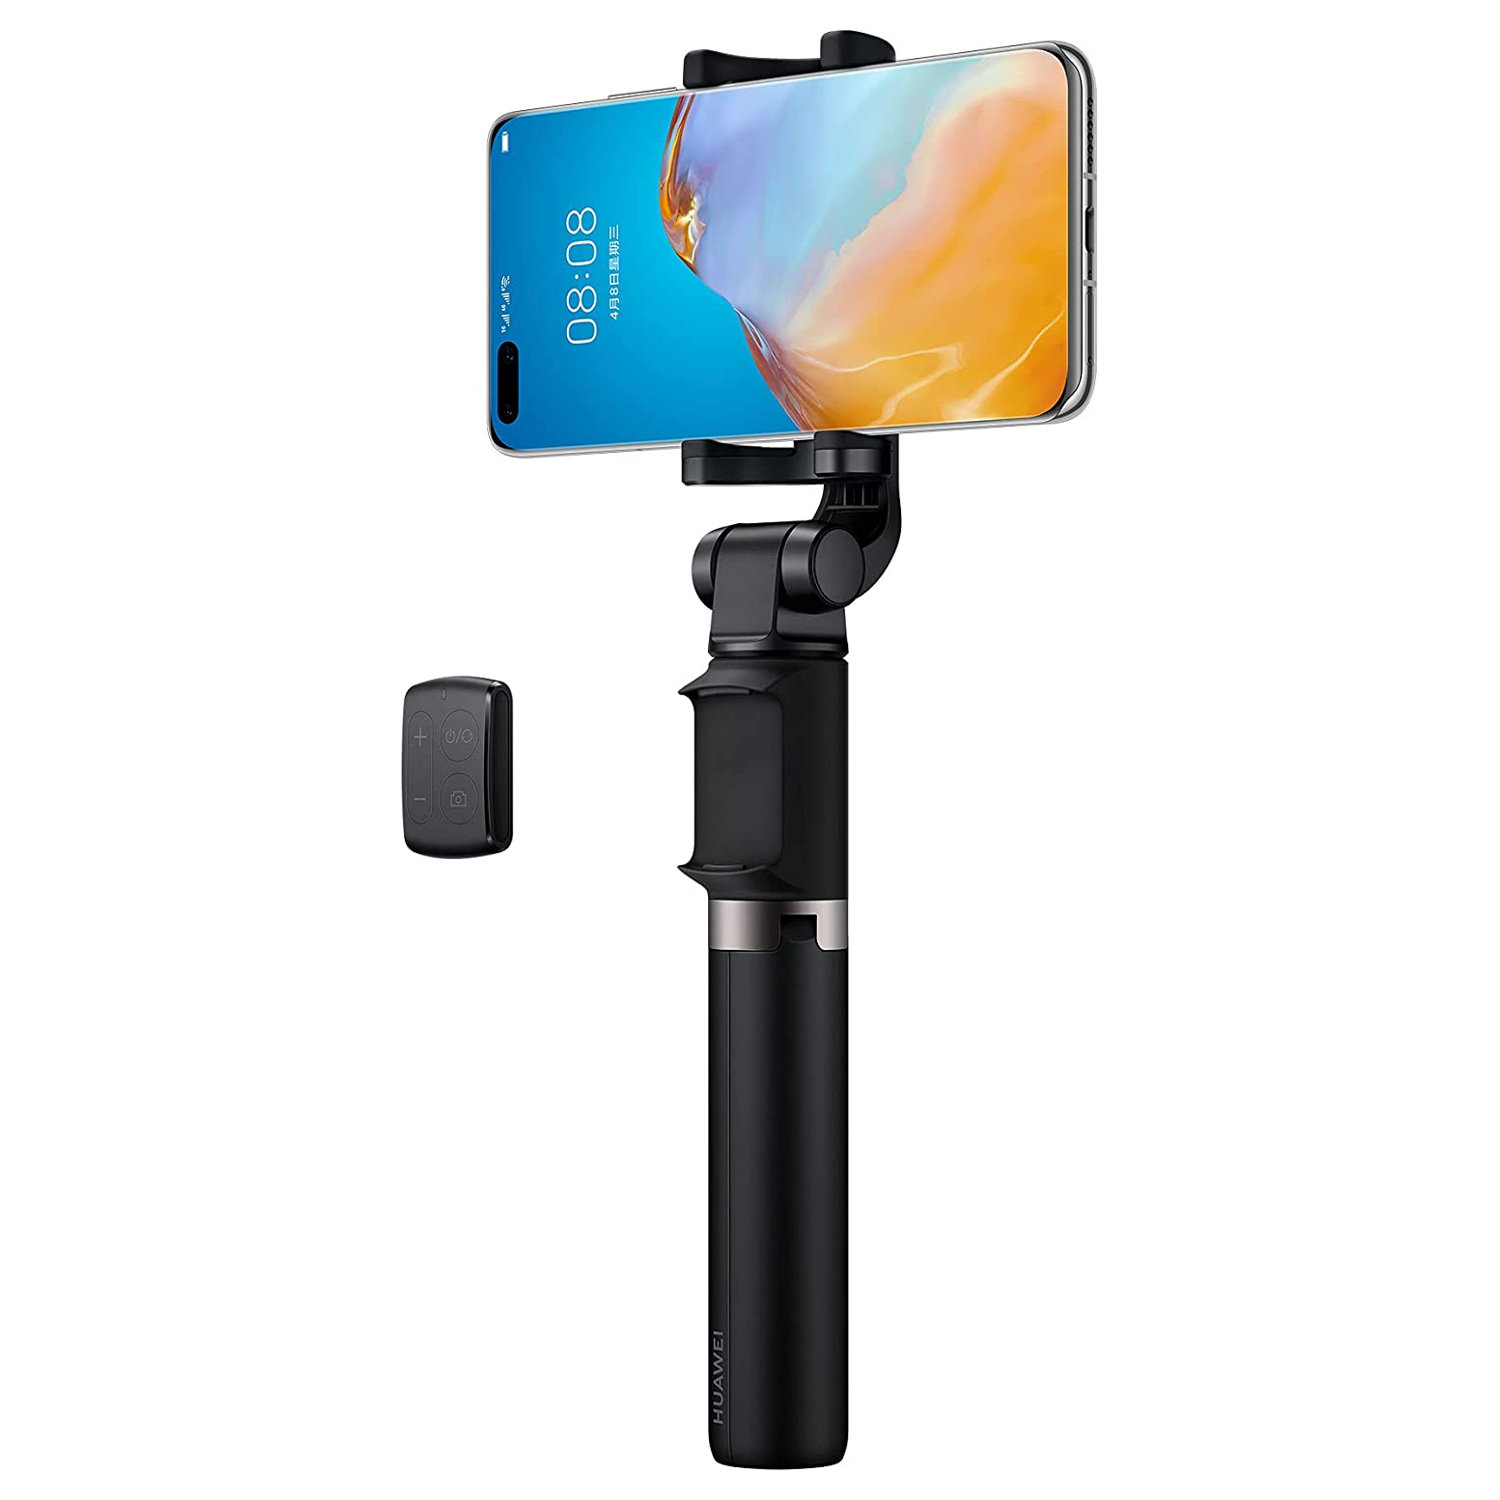 Huawei Selfie stick with remote control and phone